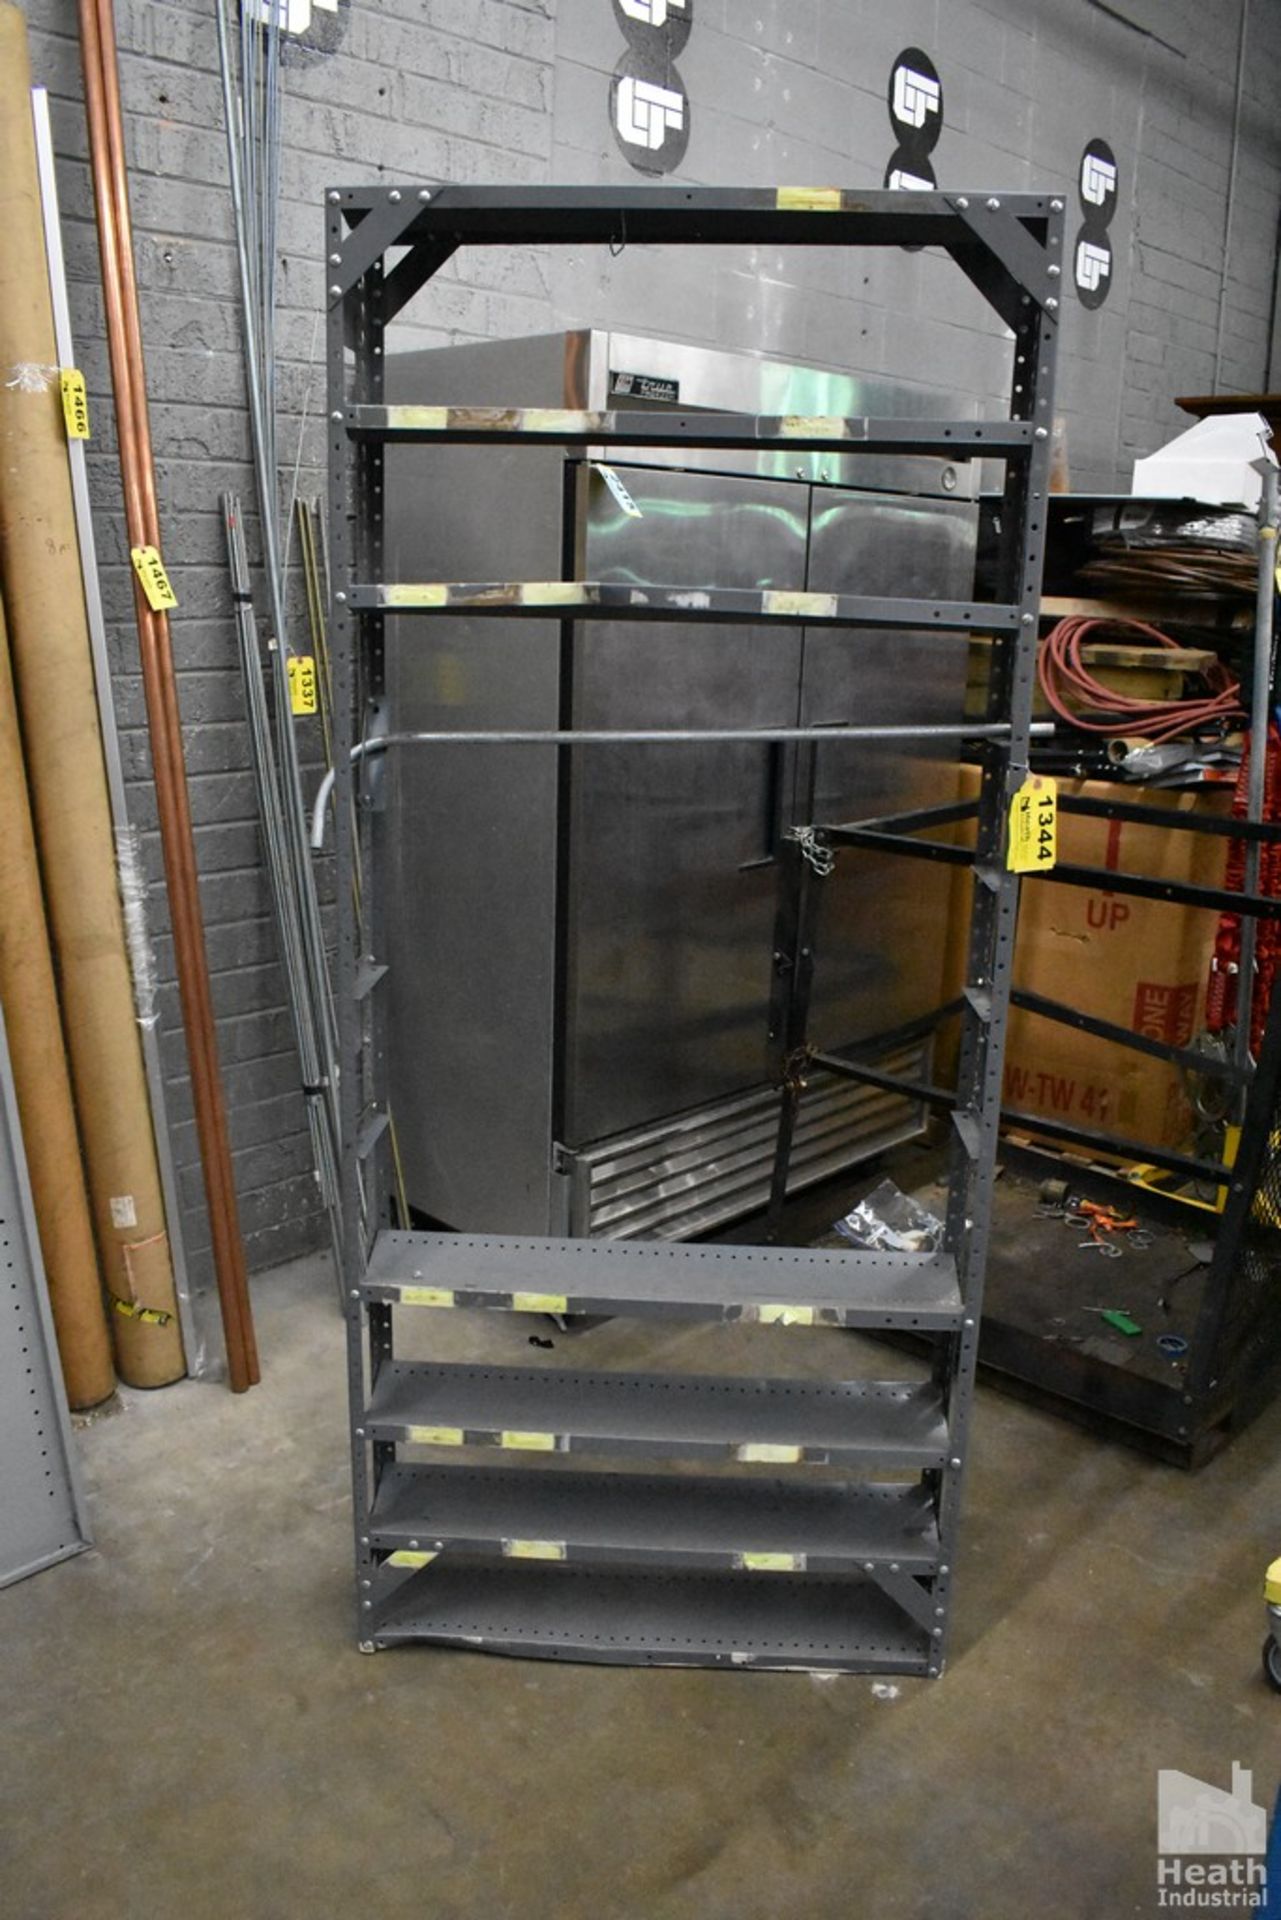 WIRE STORAGE SHELVING UNIT, 36" X 8" X 70" - Image 2 of 2